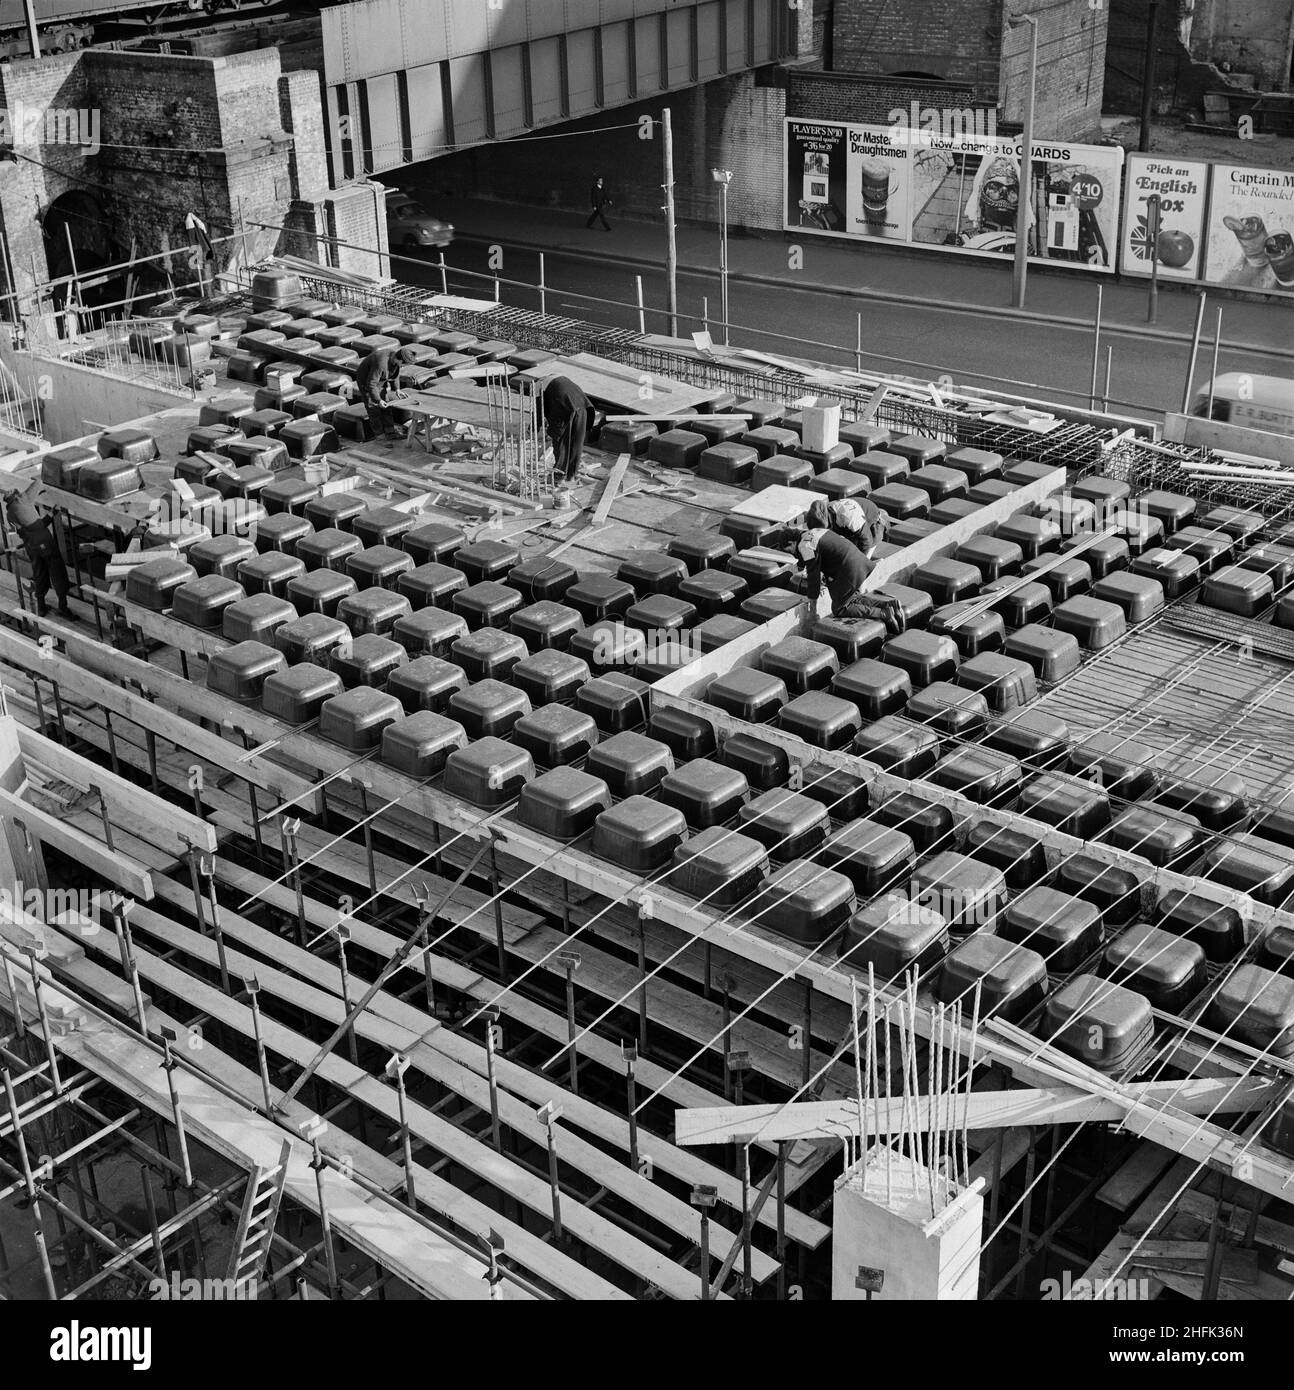 Minories Car Park, 1 Shorter Street, City of London, 31/01/1969. Polypropylene moulds in place to create the coffered structure of the floor slab of the first floor at Minories Car Park. In Team Spirit, the Laing company newsletter, these are referred to as 'Kaiser Moulds.' 2,200 of these were hired for the project and all but one of them were returned intact. At this stage of the project, the site team poured 300 cubic yards of concrete per week. Stock Photo